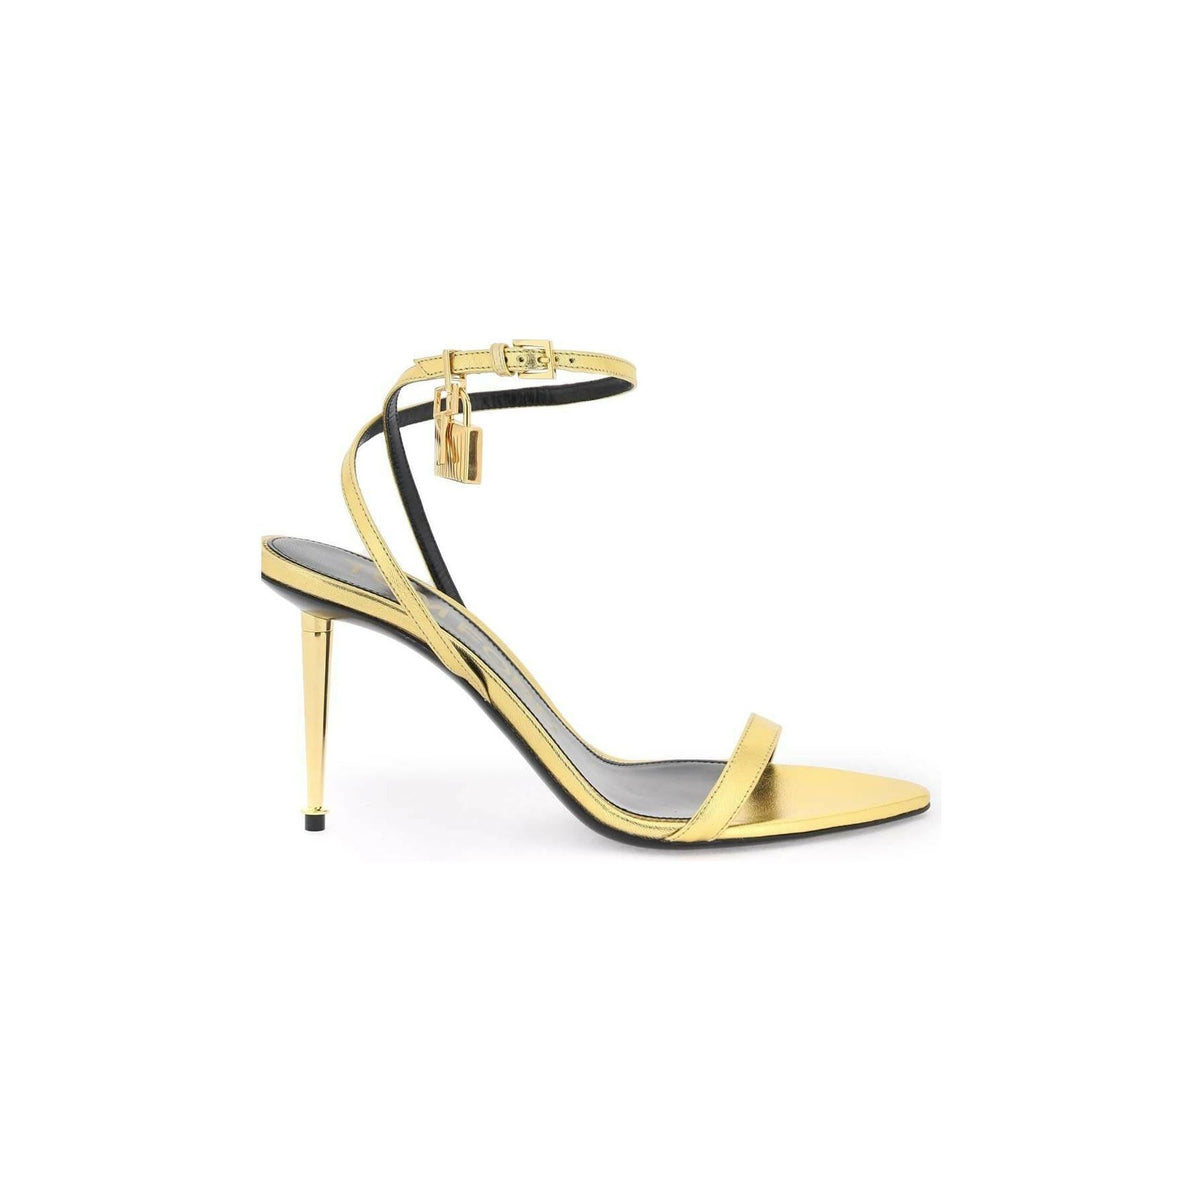 TOM FORD - Gold Laminated Padlock 85mm Nappa Leather Pointy Sandals - JOHN JULIA